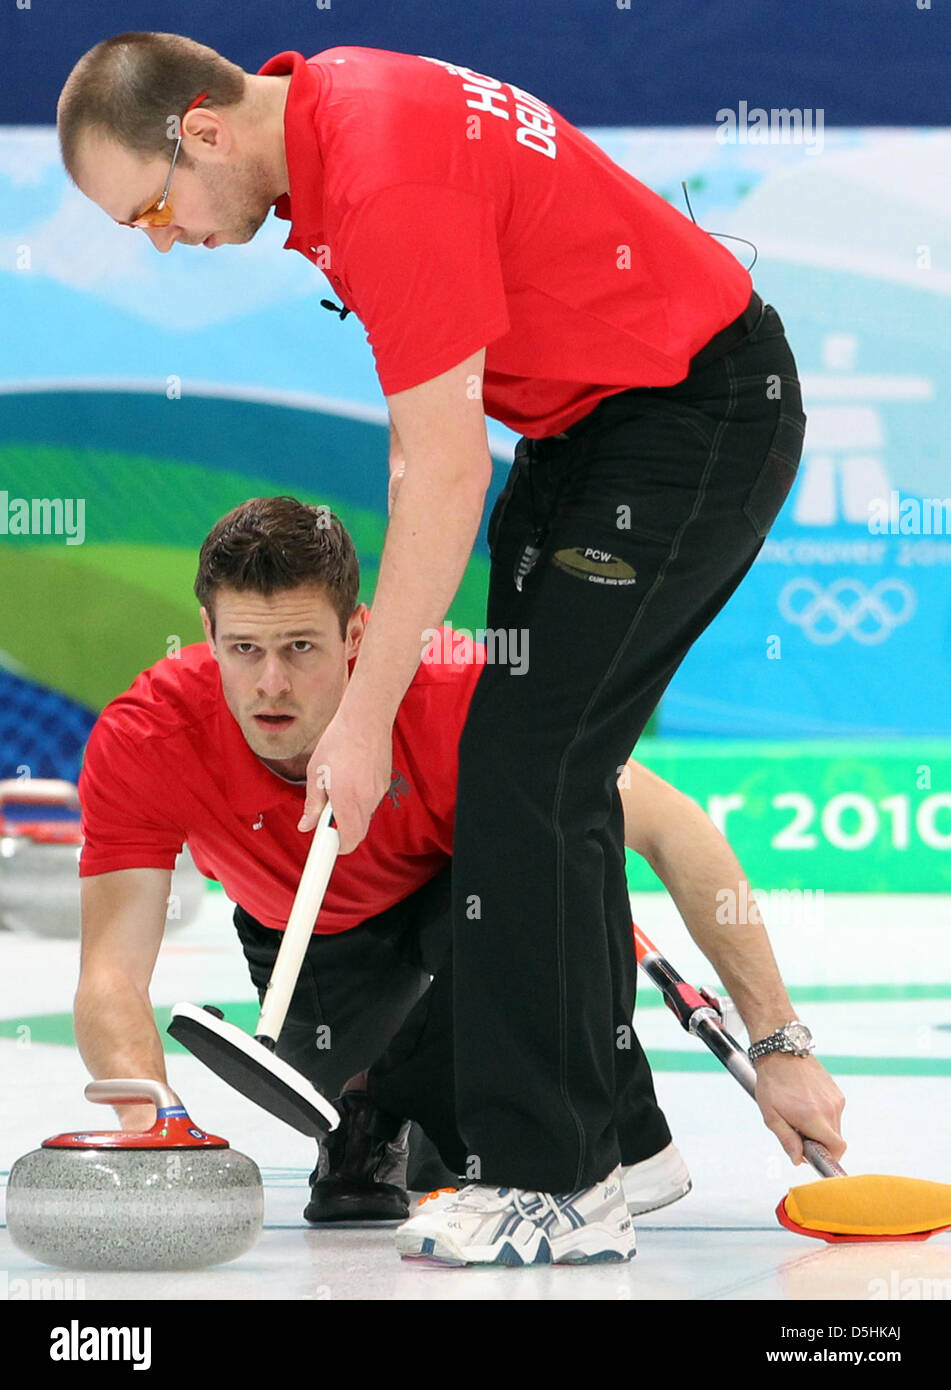 Skip Andy Lang (R) of Germany releases his stone as Holger Hoehne guides it during Curling men's round robin session 3 at the Olympic Center during the Vancouver 2010 Olympic Games in Vancouver, Canada 17 February 2010. Germany's opponent was Sweden. Photo: Daniel Karmann  +++(c) dpa - Bildfunk+++ Stock Photo